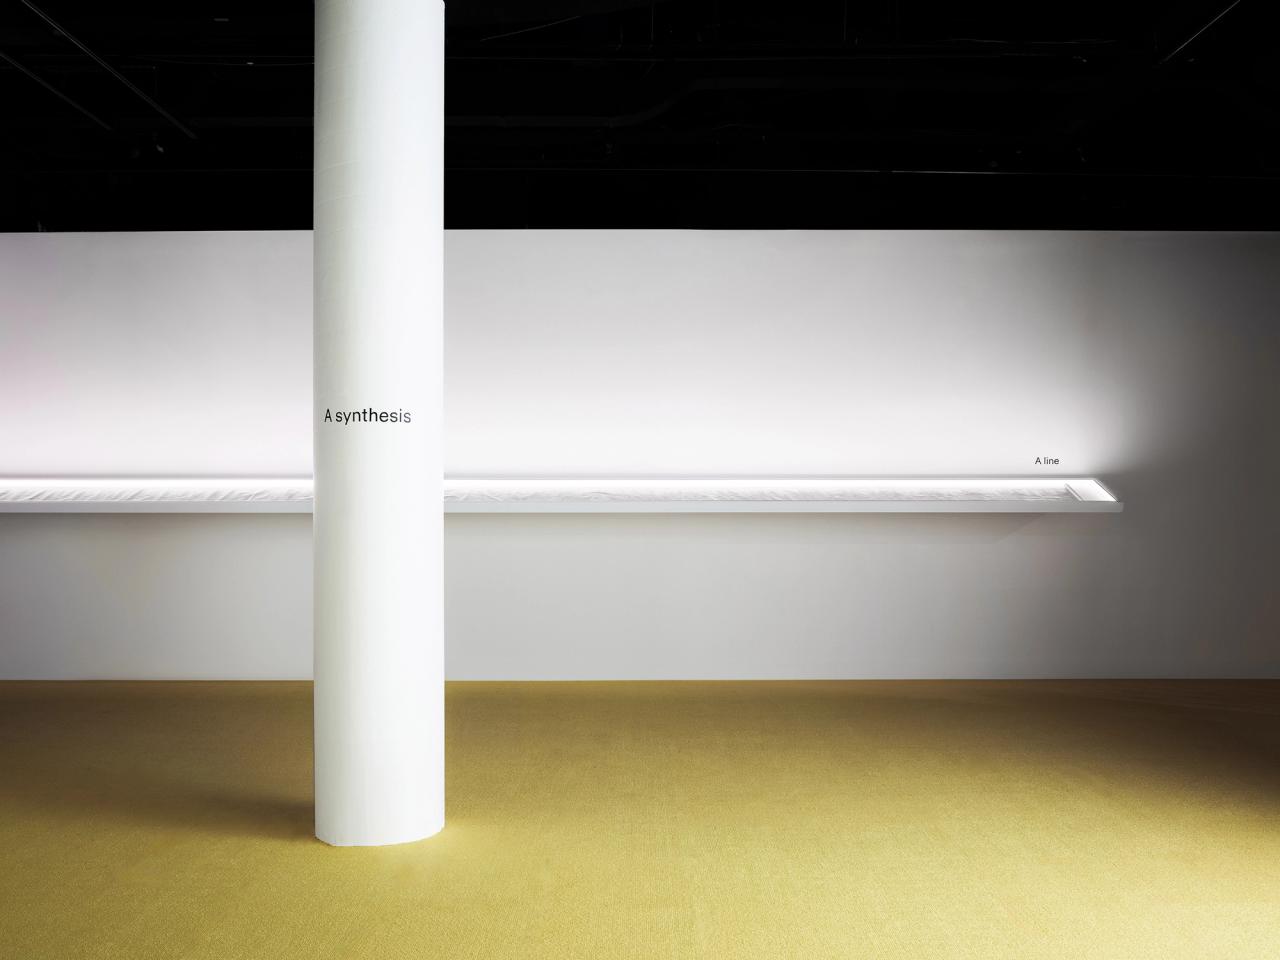 White pillar in front a long display shelf, with yellow flooring